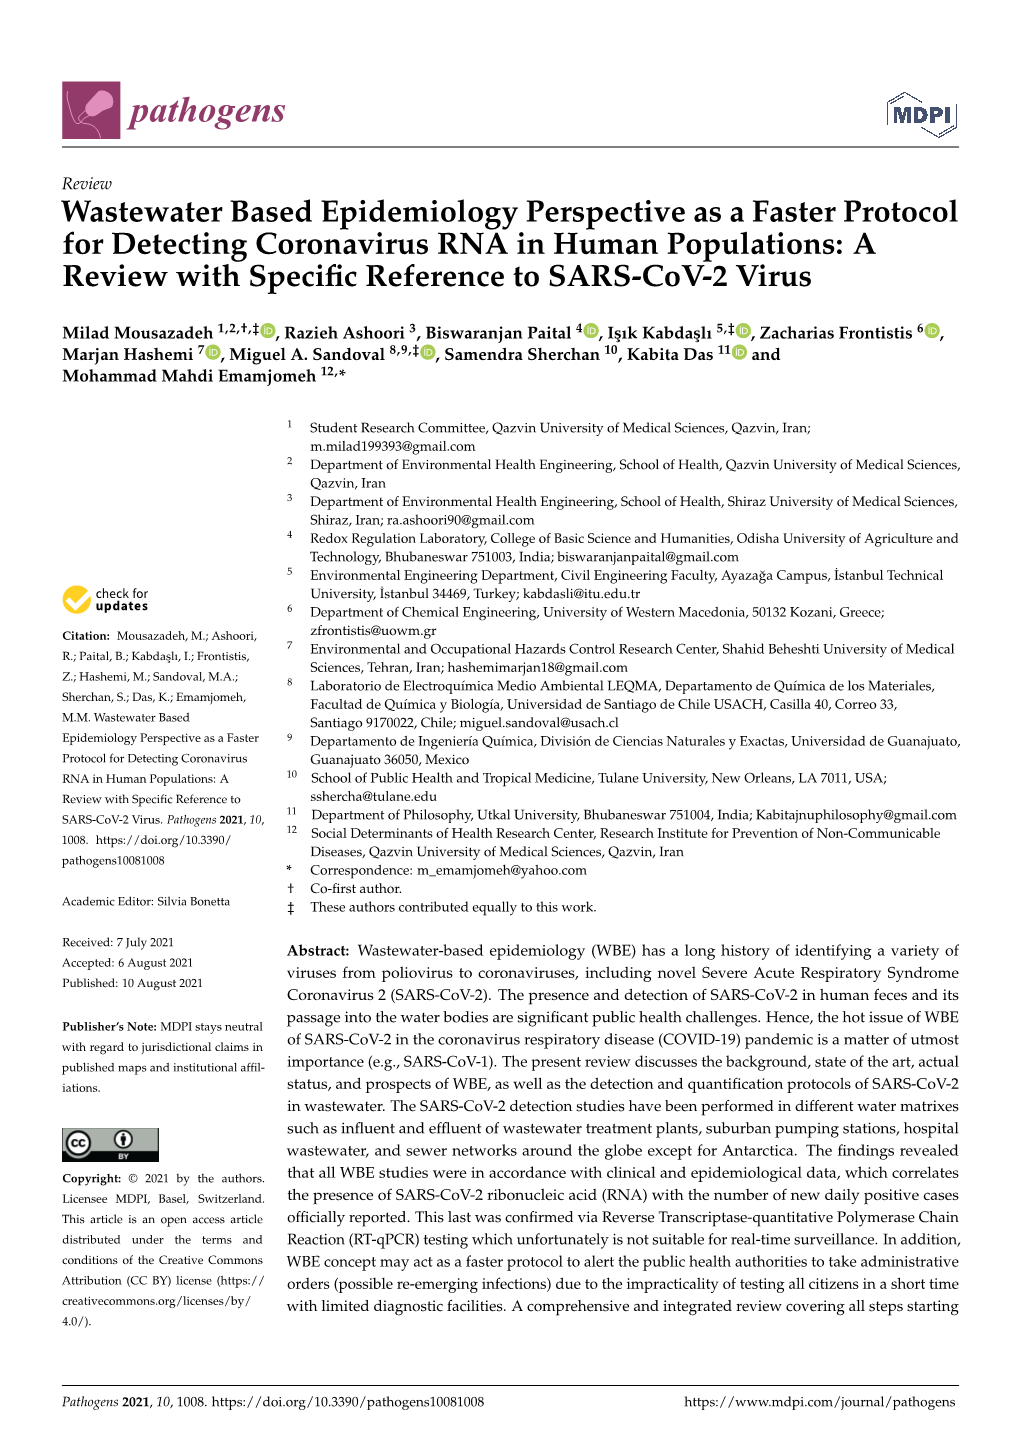 Wastewater Based Epidemiology Perspective As a Faster Protocol for Detecting Coronavirus RNA in Human Populations: a Review with Speciﬁc Reference to SARS-Cov-2 Virus